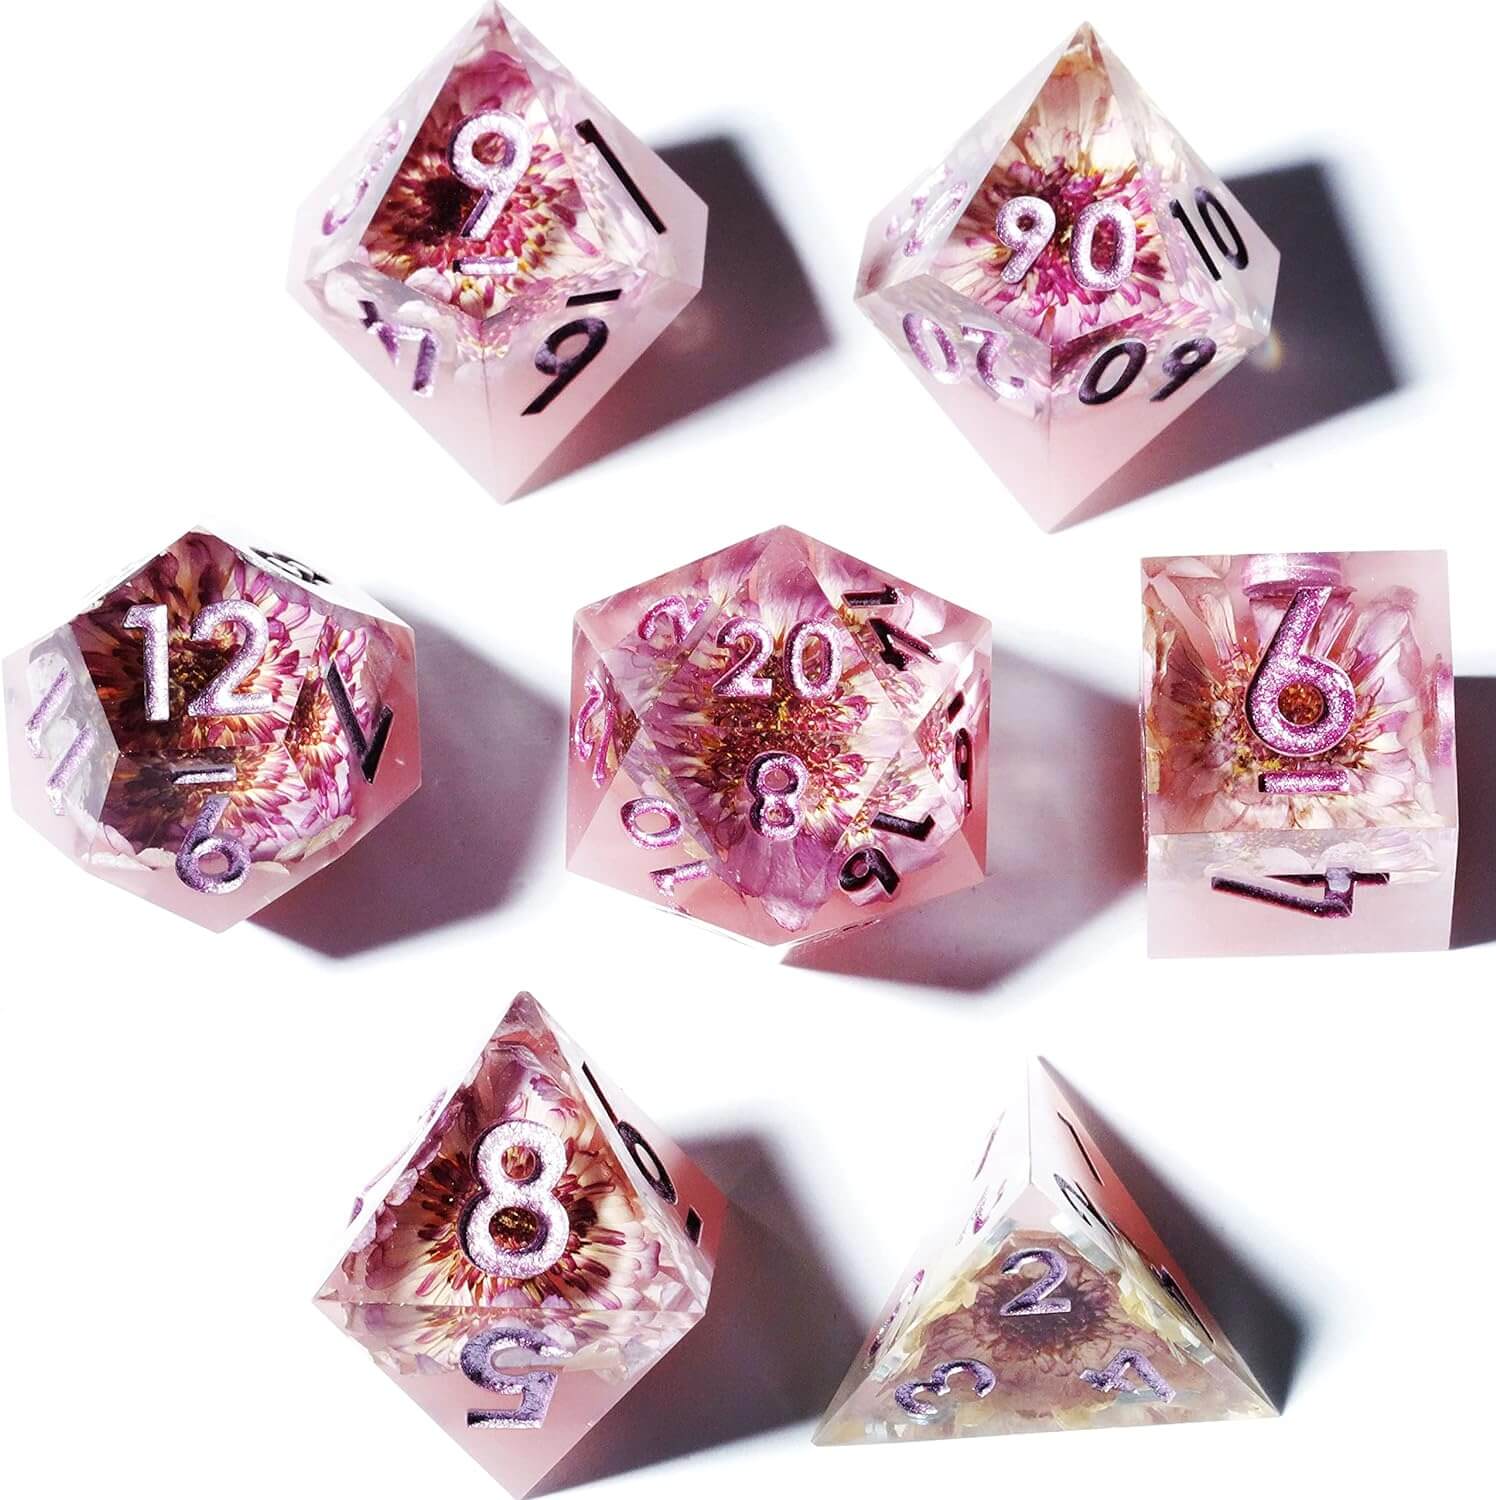 Undead Flower Polyhedral Resin 7 Cool DnD Dice Sets - Dice of Dragons